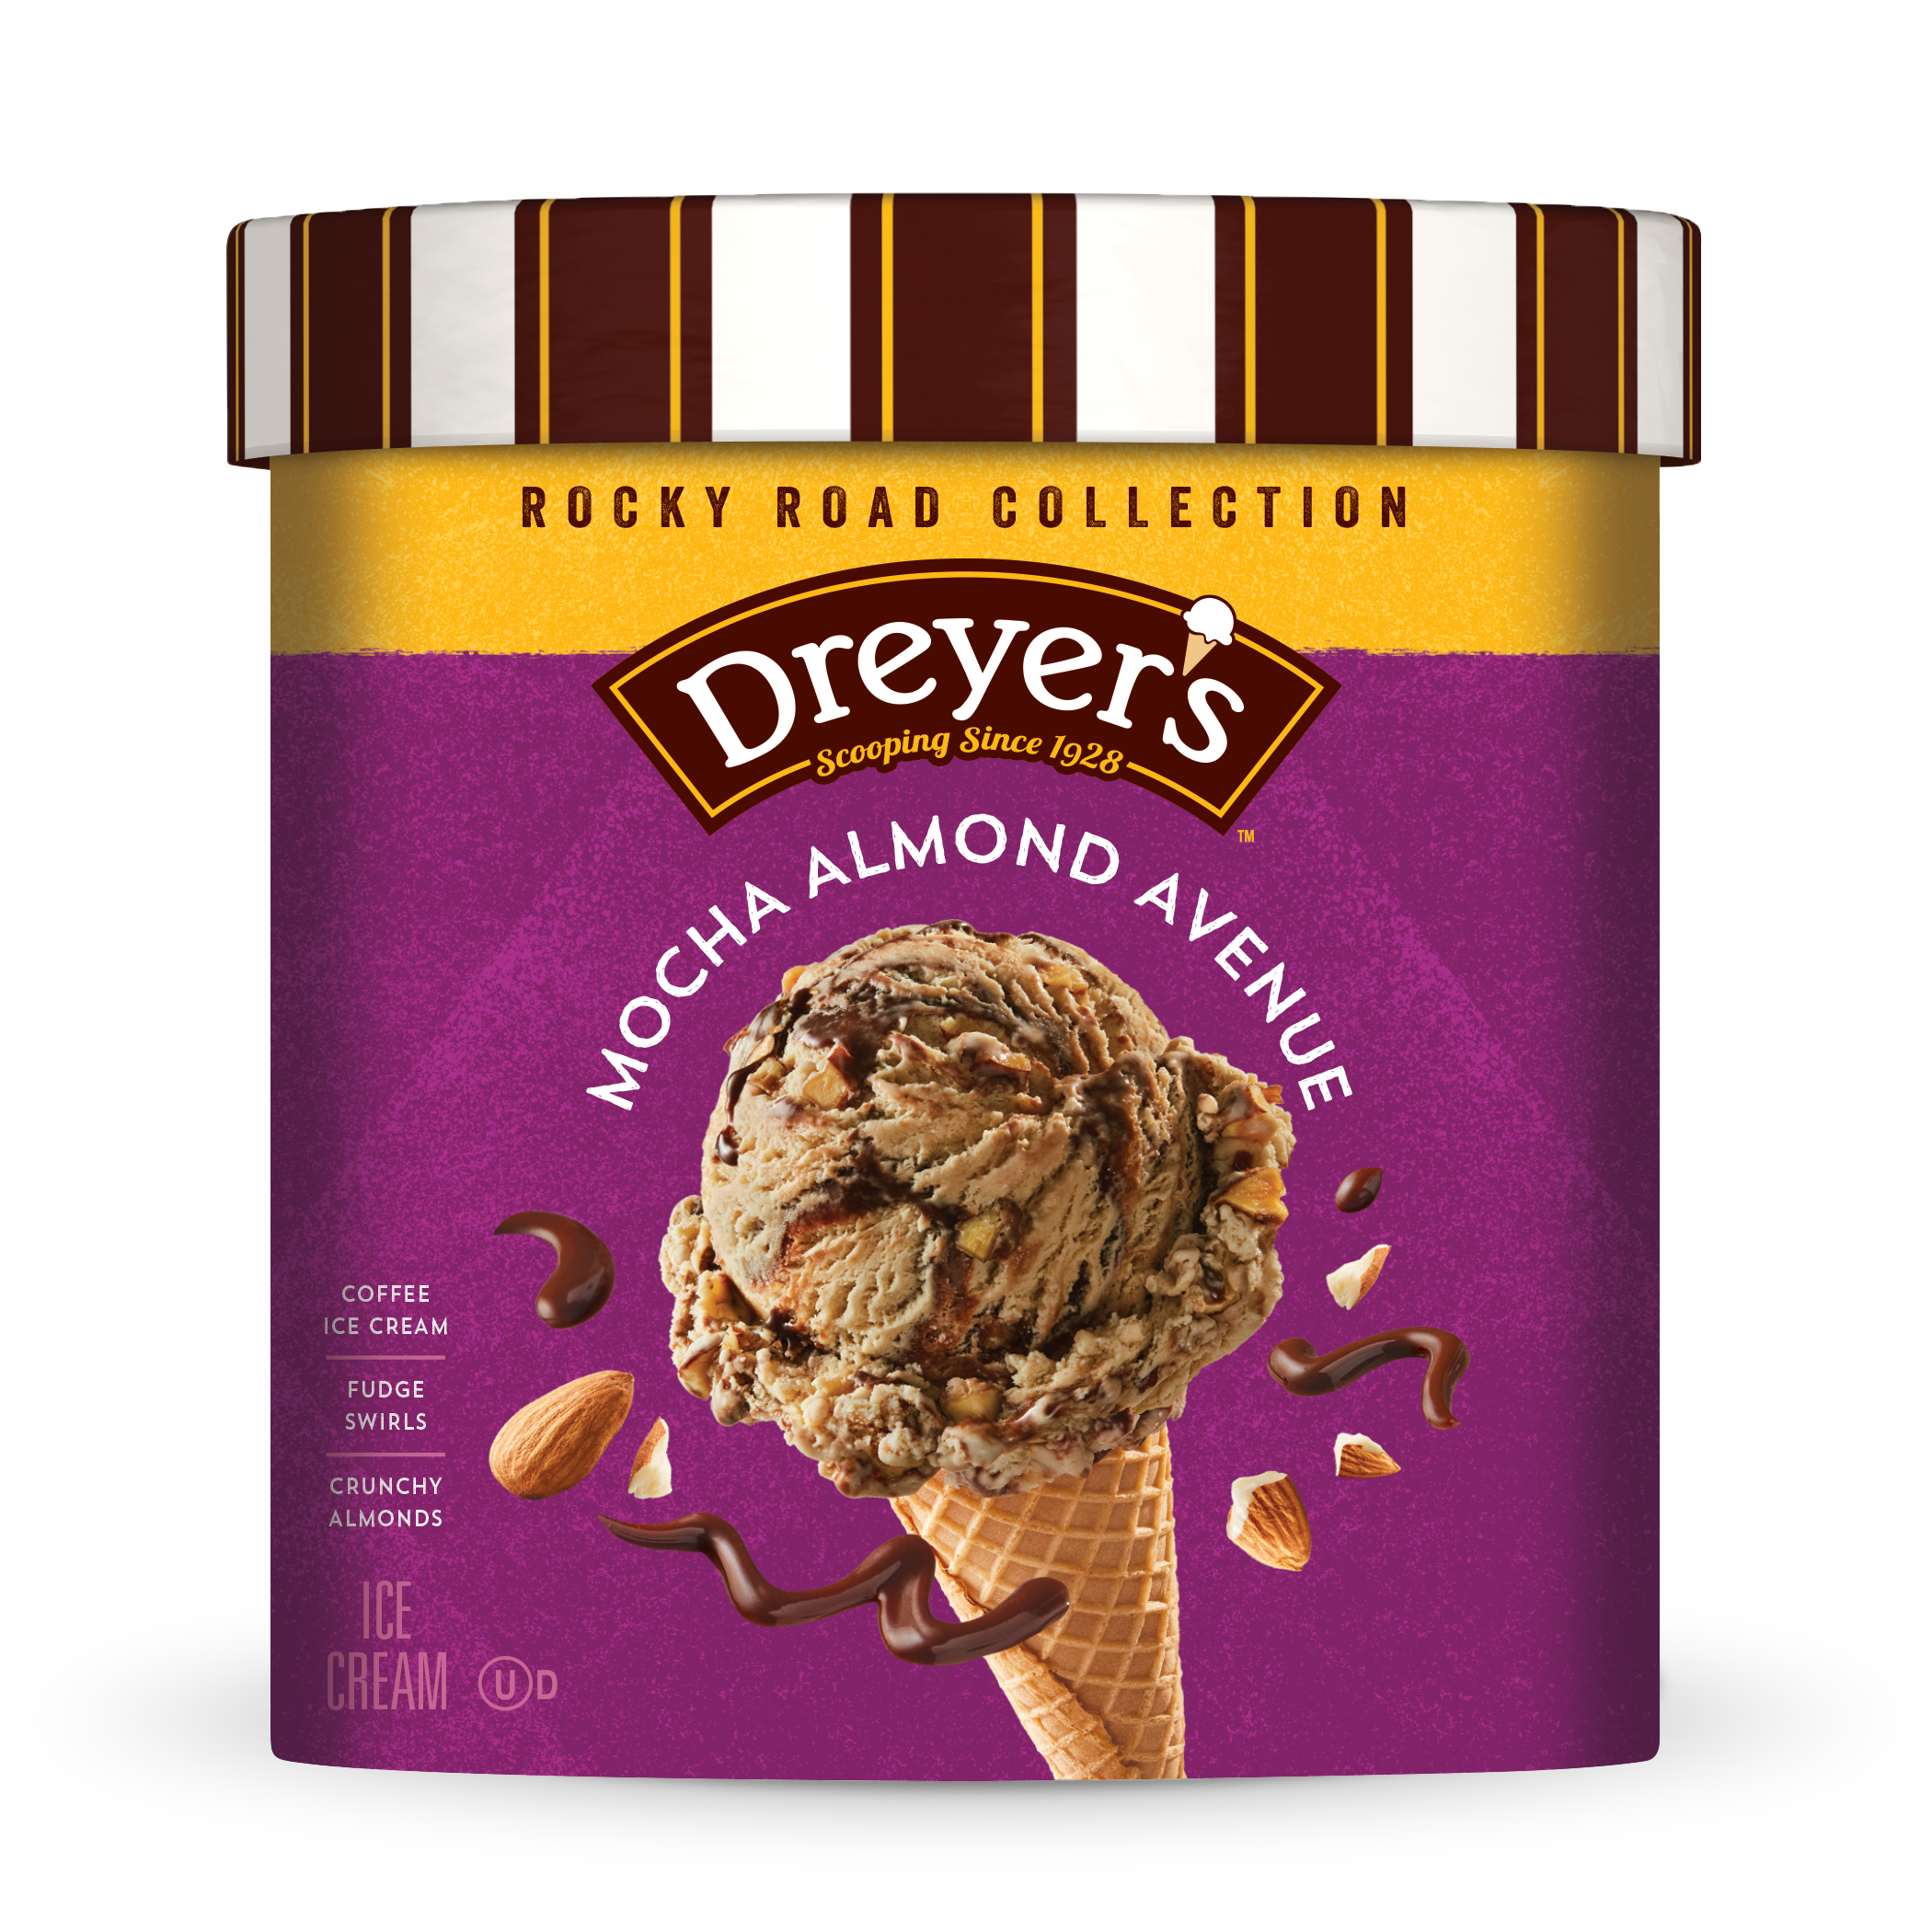 Photo a carton of Dreyer's Mocha Almond ice cream in retail packaging.